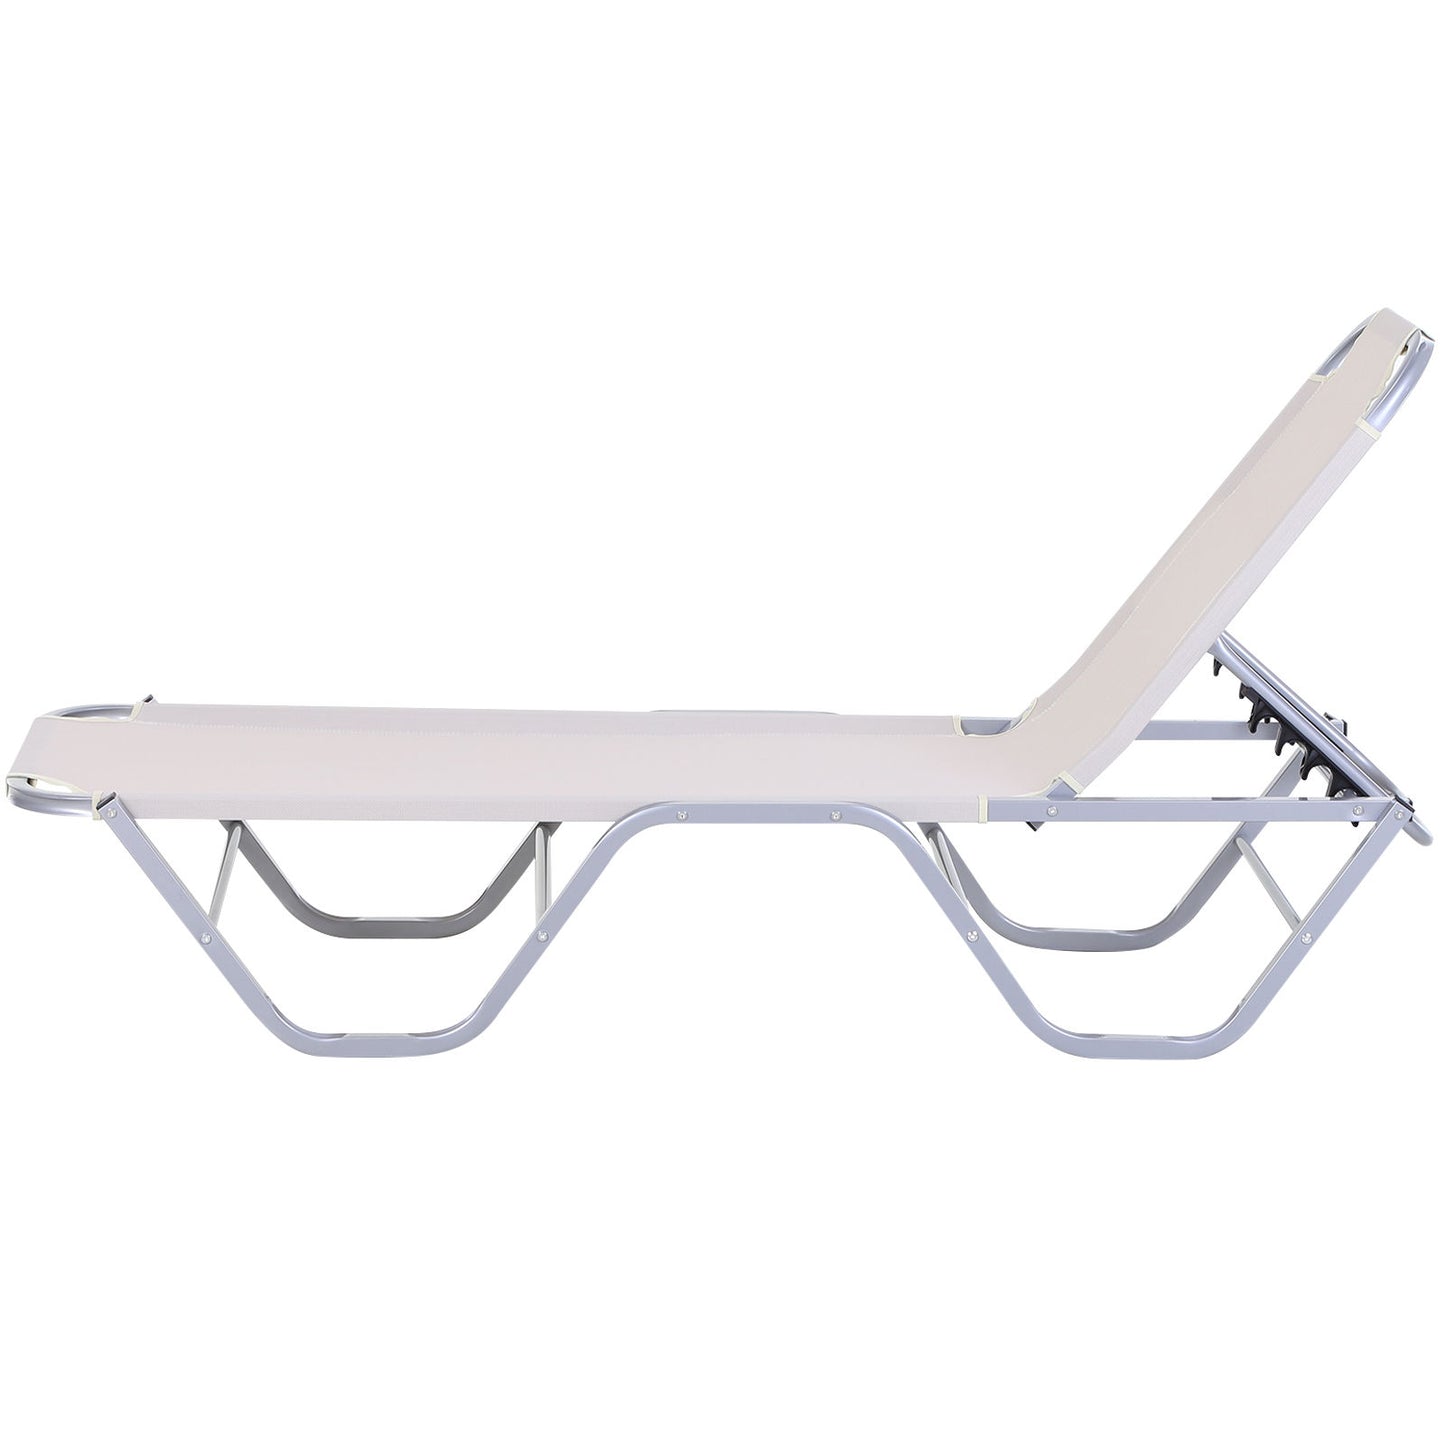 Nancy's Rough Mile Lounger - Lounge bed - Lounger - Cream, Silver - Aluminum